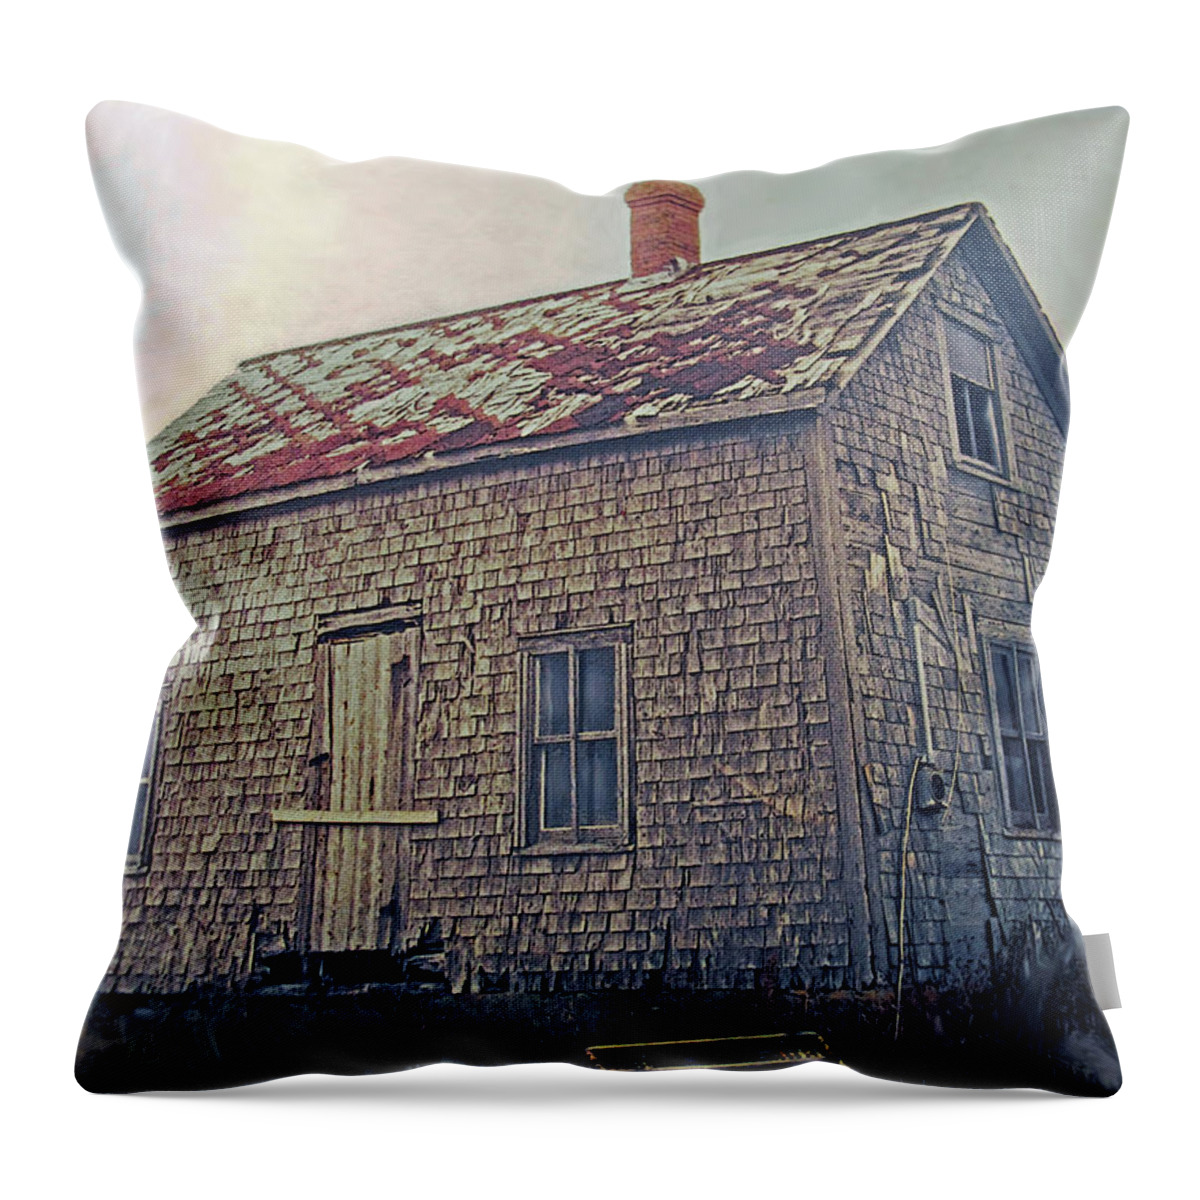 Shack Throw Pillow featuring the photograph Closed by Ian MacDonald